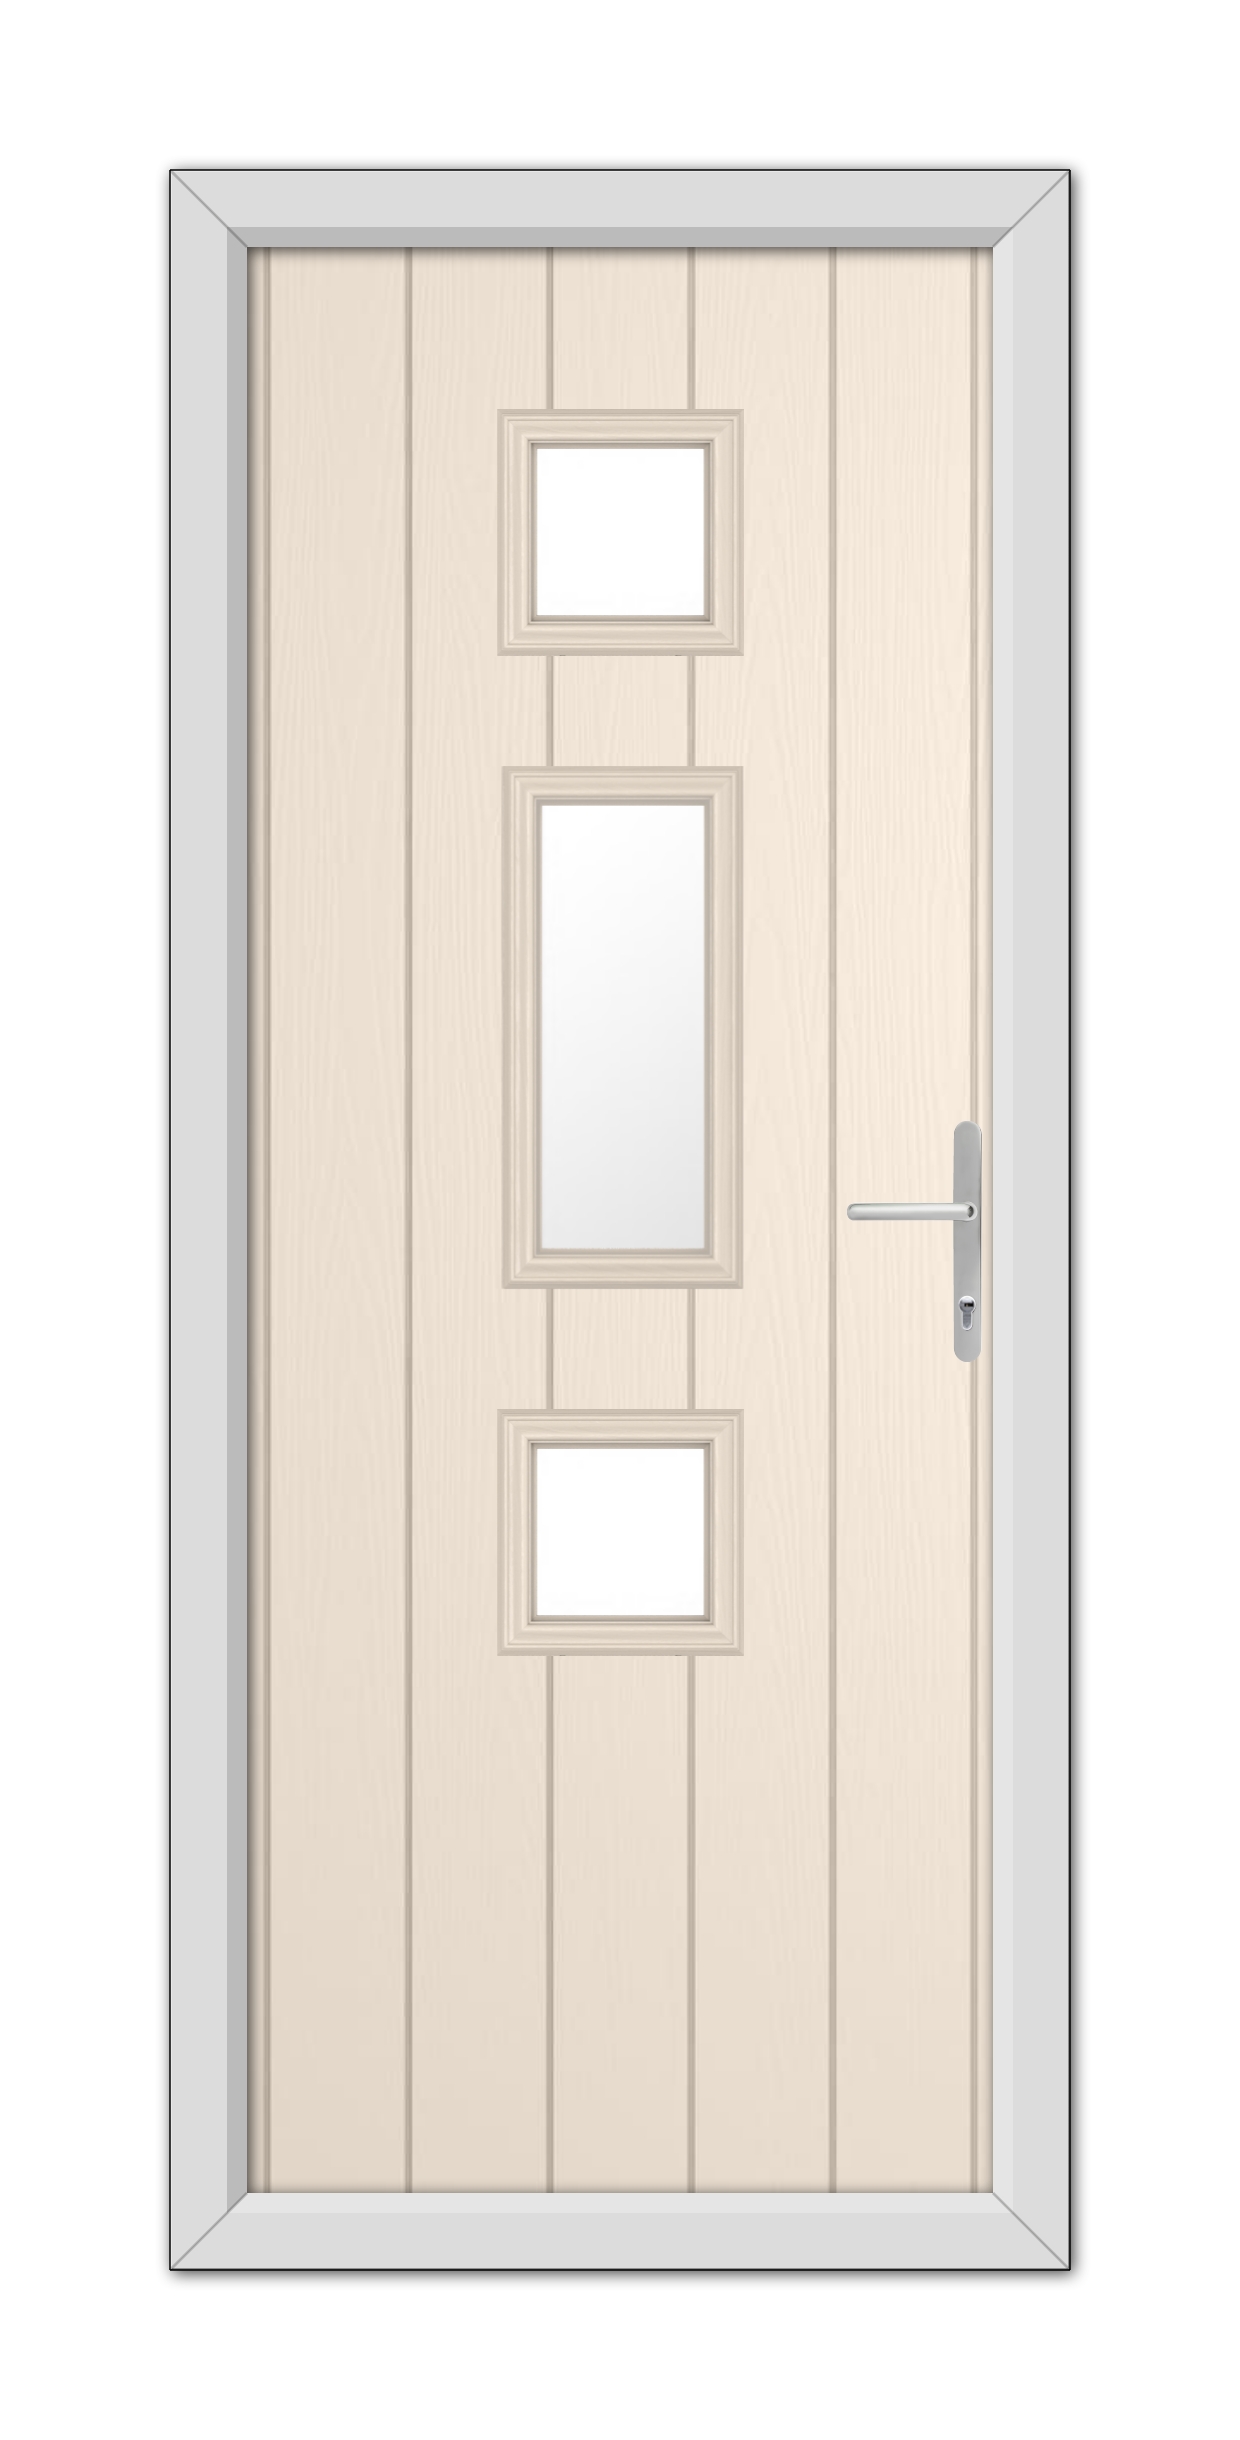 A Cream York Composite Door 48mm Timber Core featuring three vertical glass panels and a metallic handle, set within a gray frame.